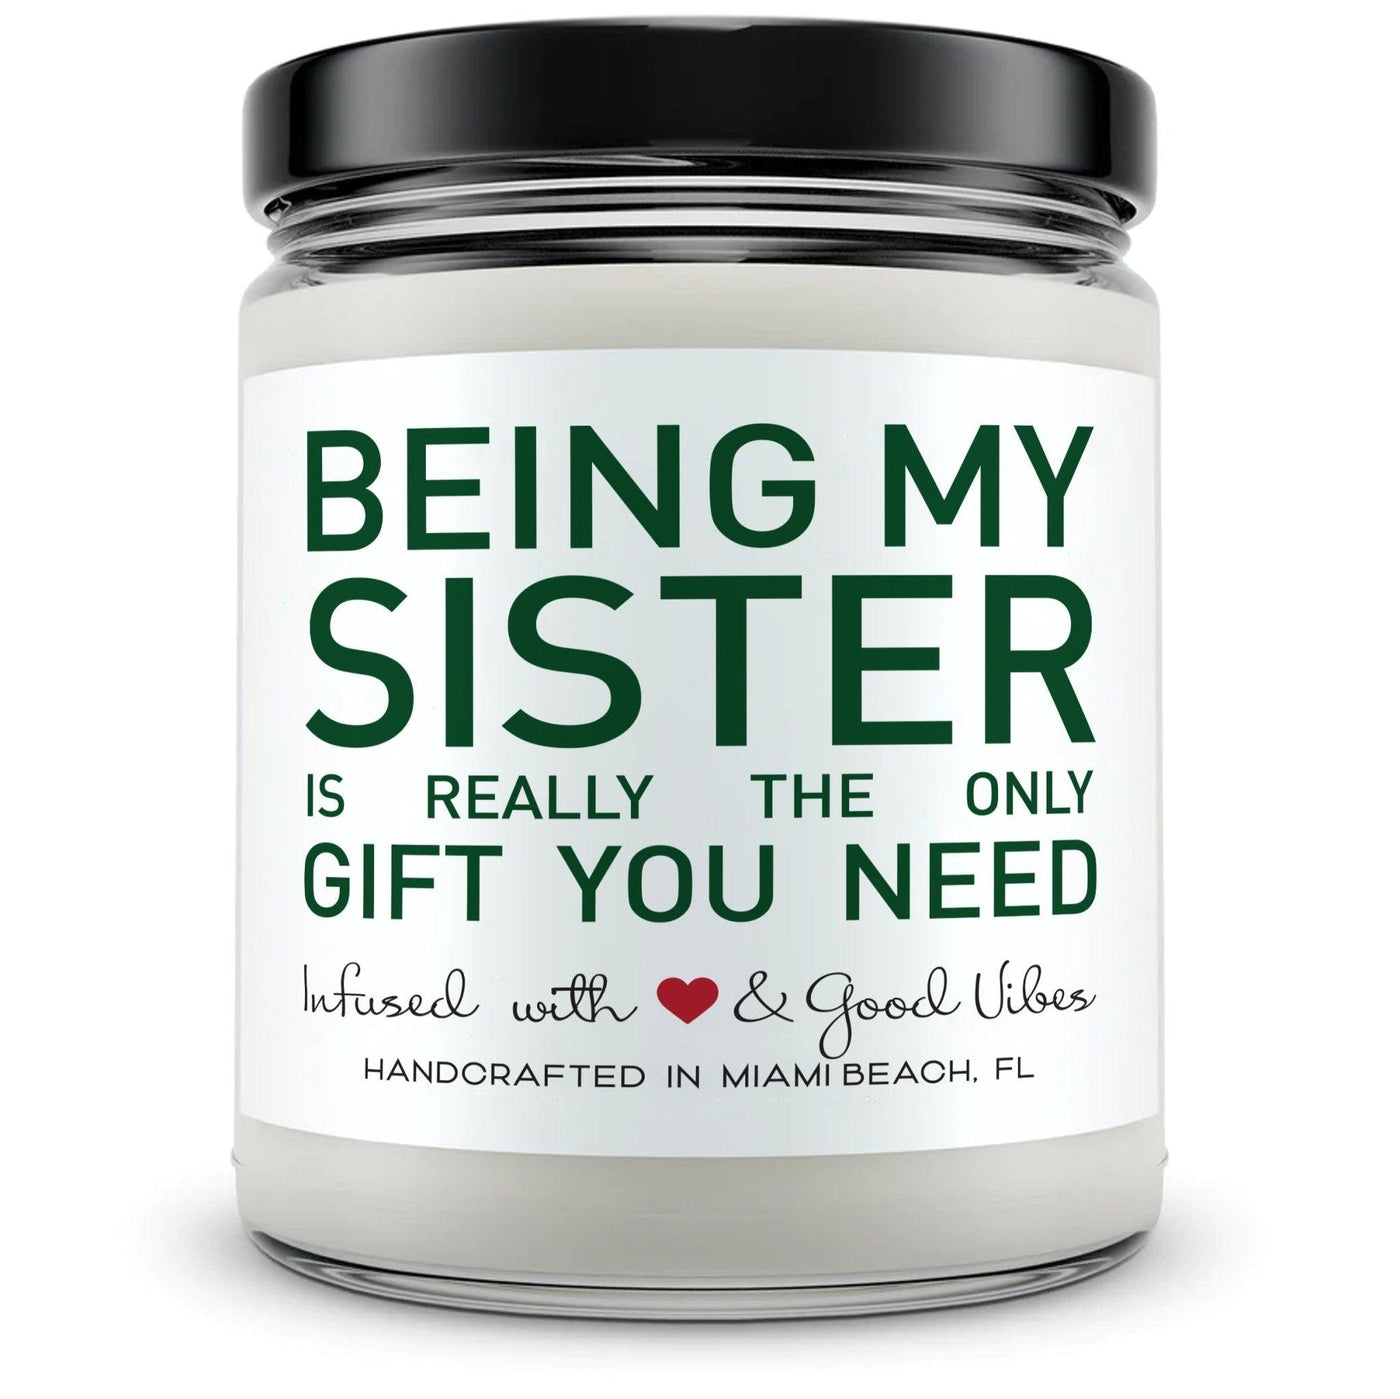 Being my sister is really the only gift you need. - Mint Sugar Candle